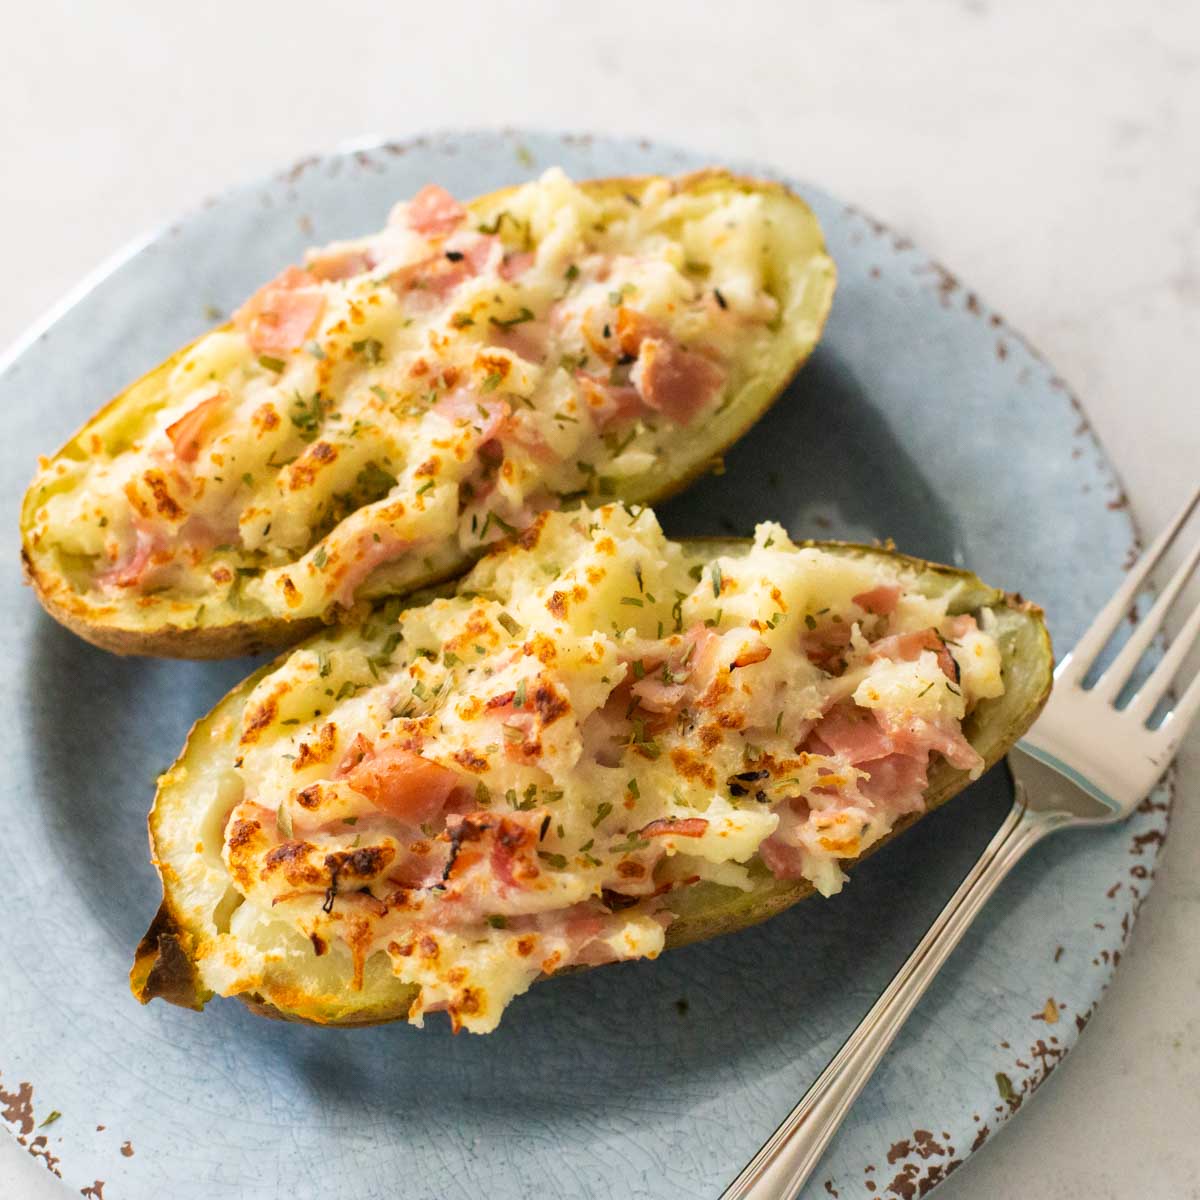 Two ham and cheese stuffed potatoes are on a serving plate with a fork.